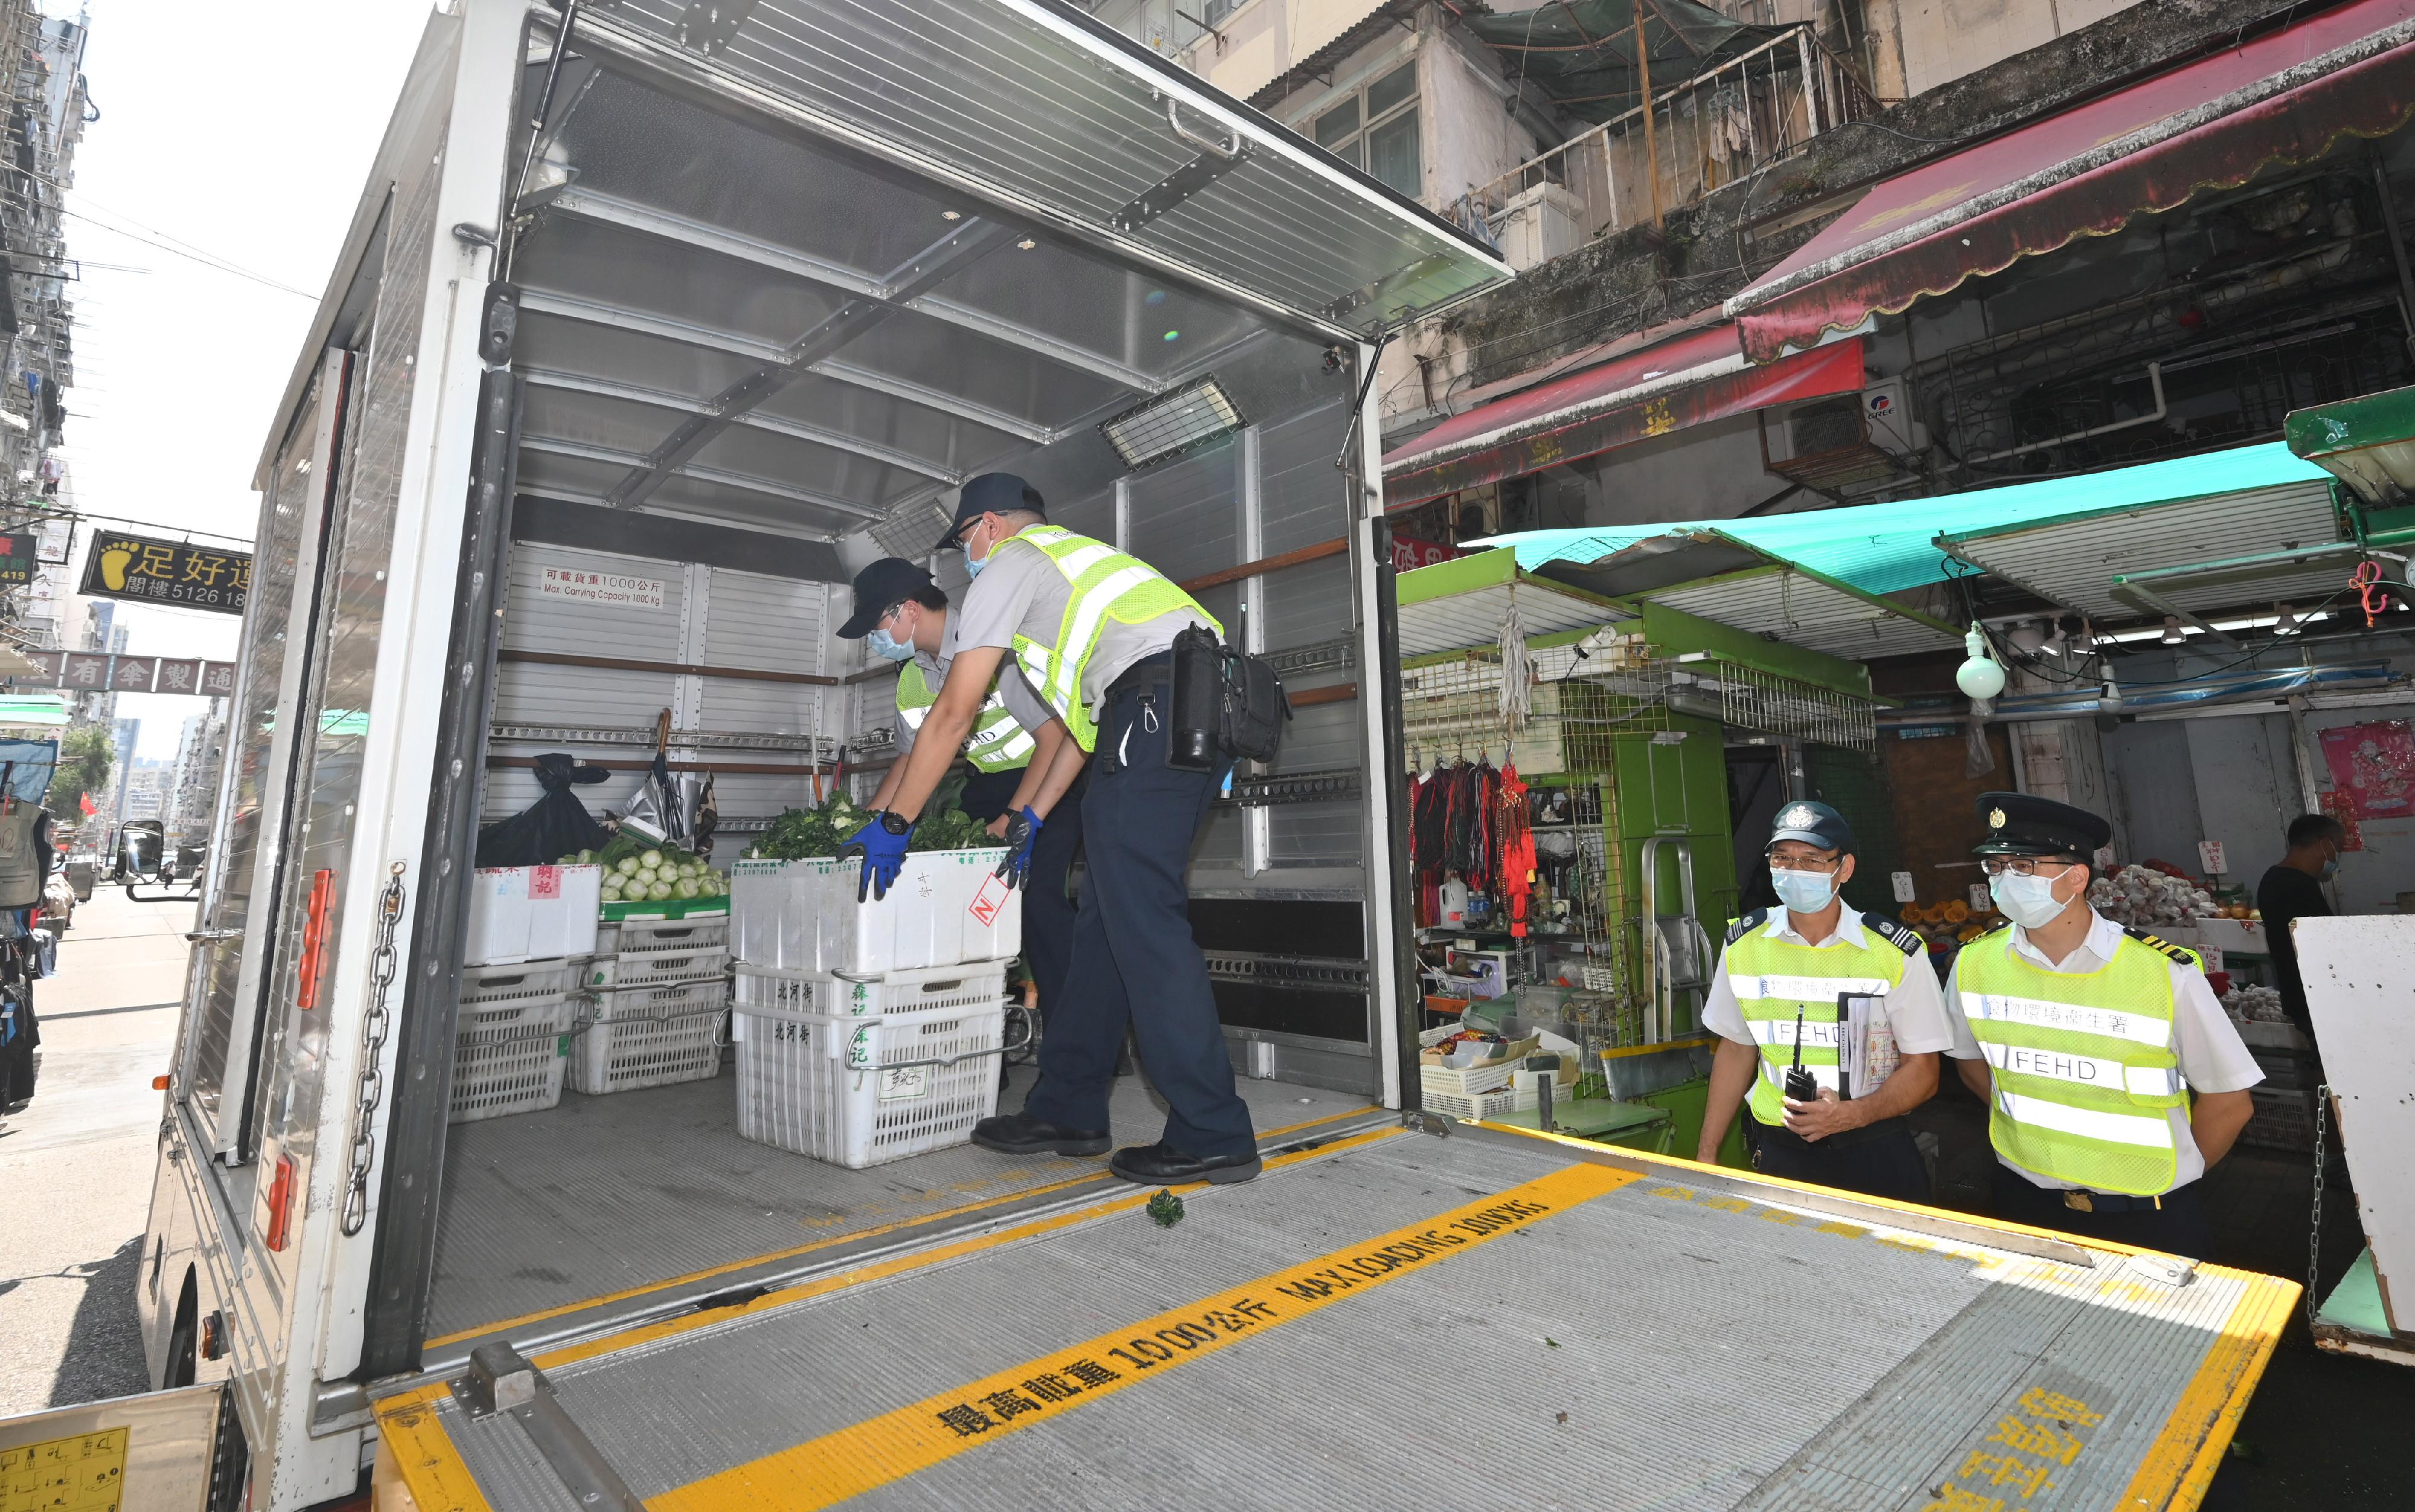 A spokesman for the Food and Environmental Hygiene Department (FEHD) said today (October 6) that the FEHD and the Hong Kong Police Force have started a series of stringent enforcement actions against illegal shop front extension activities in various districts since October 3. Photo shows officers of the FEHD during the operation in Sham Shui Po yesterday (October 5).